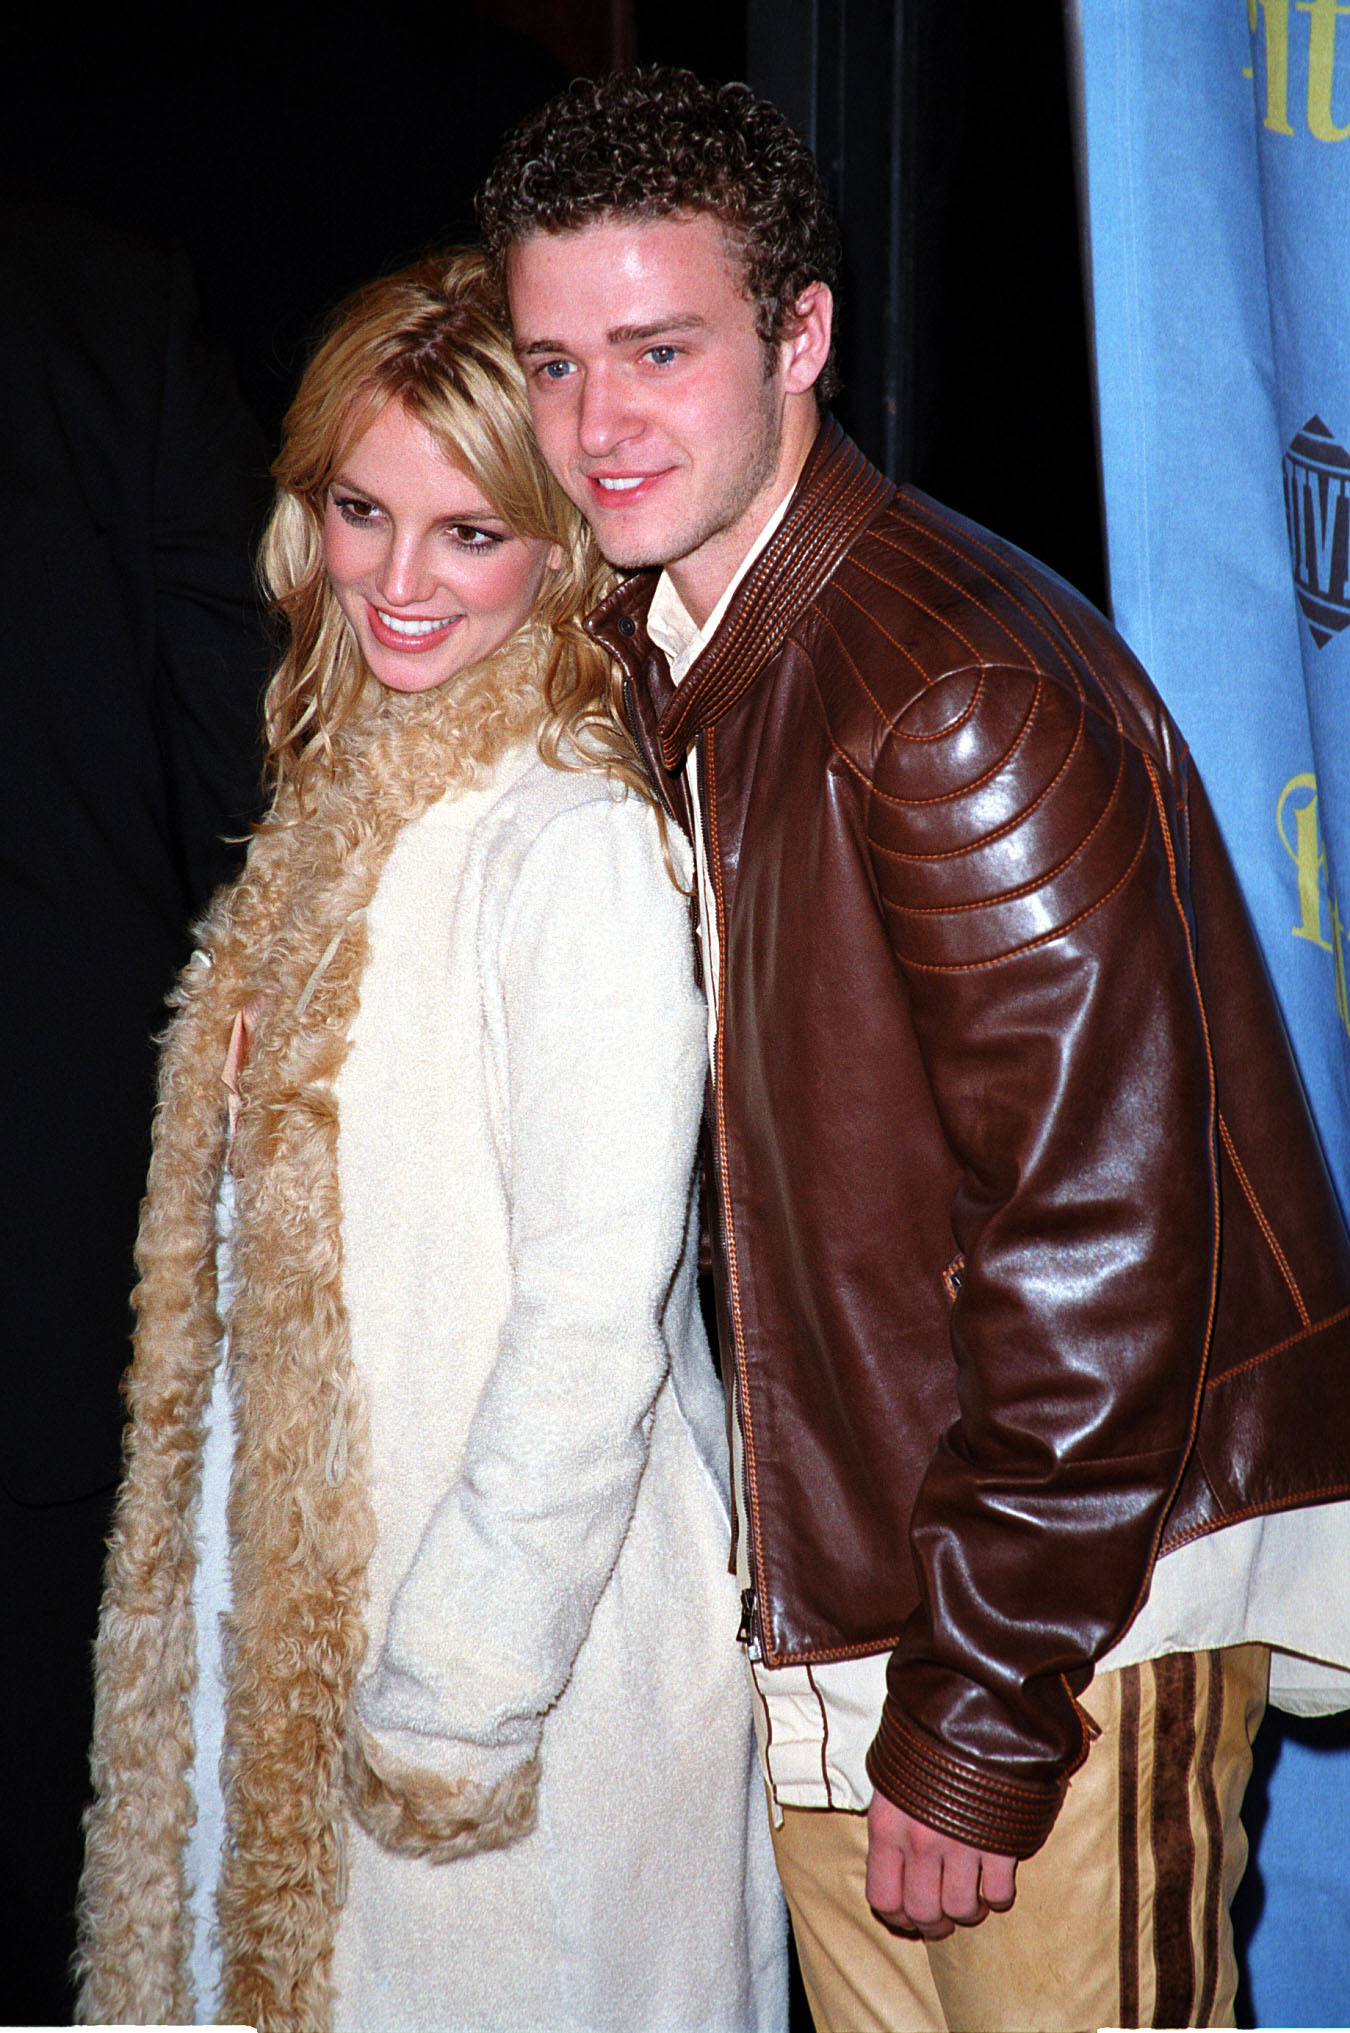 Britney Spears and Justin Timberlake at her album release party in New York City on November 6, 2001 | Source: Getty Images